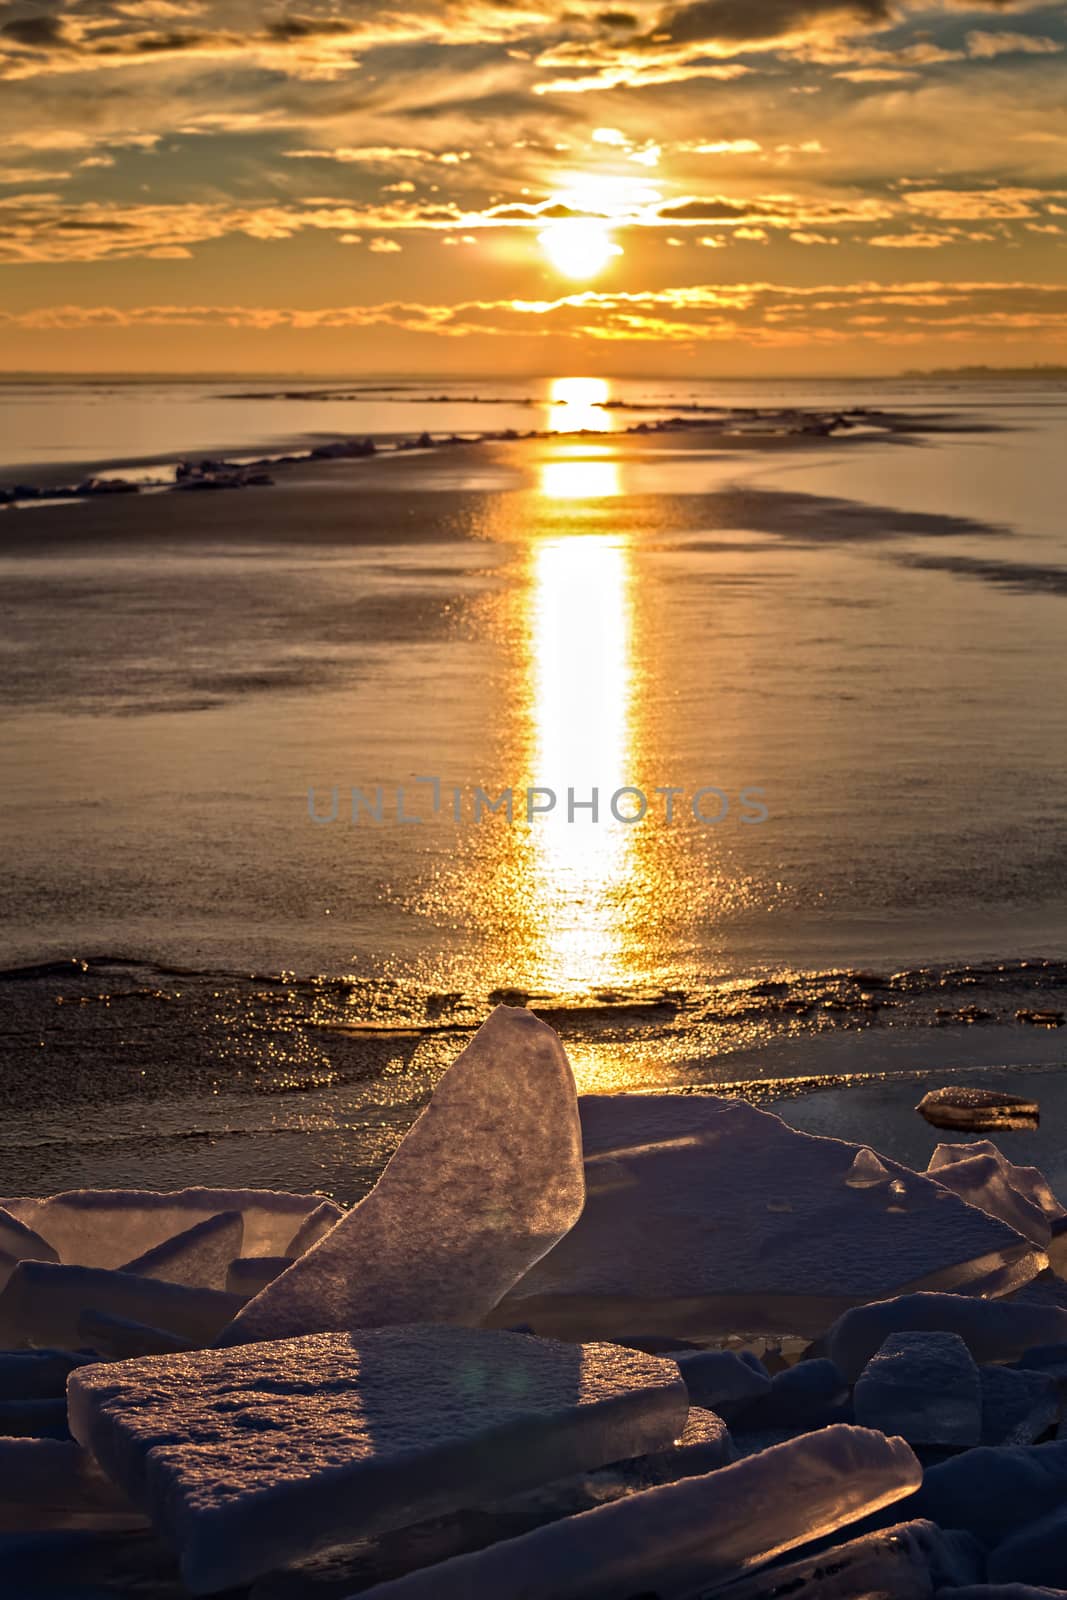 A lot of iceblocks on each other in Lake Balaton on the sunset l by Digoarpi